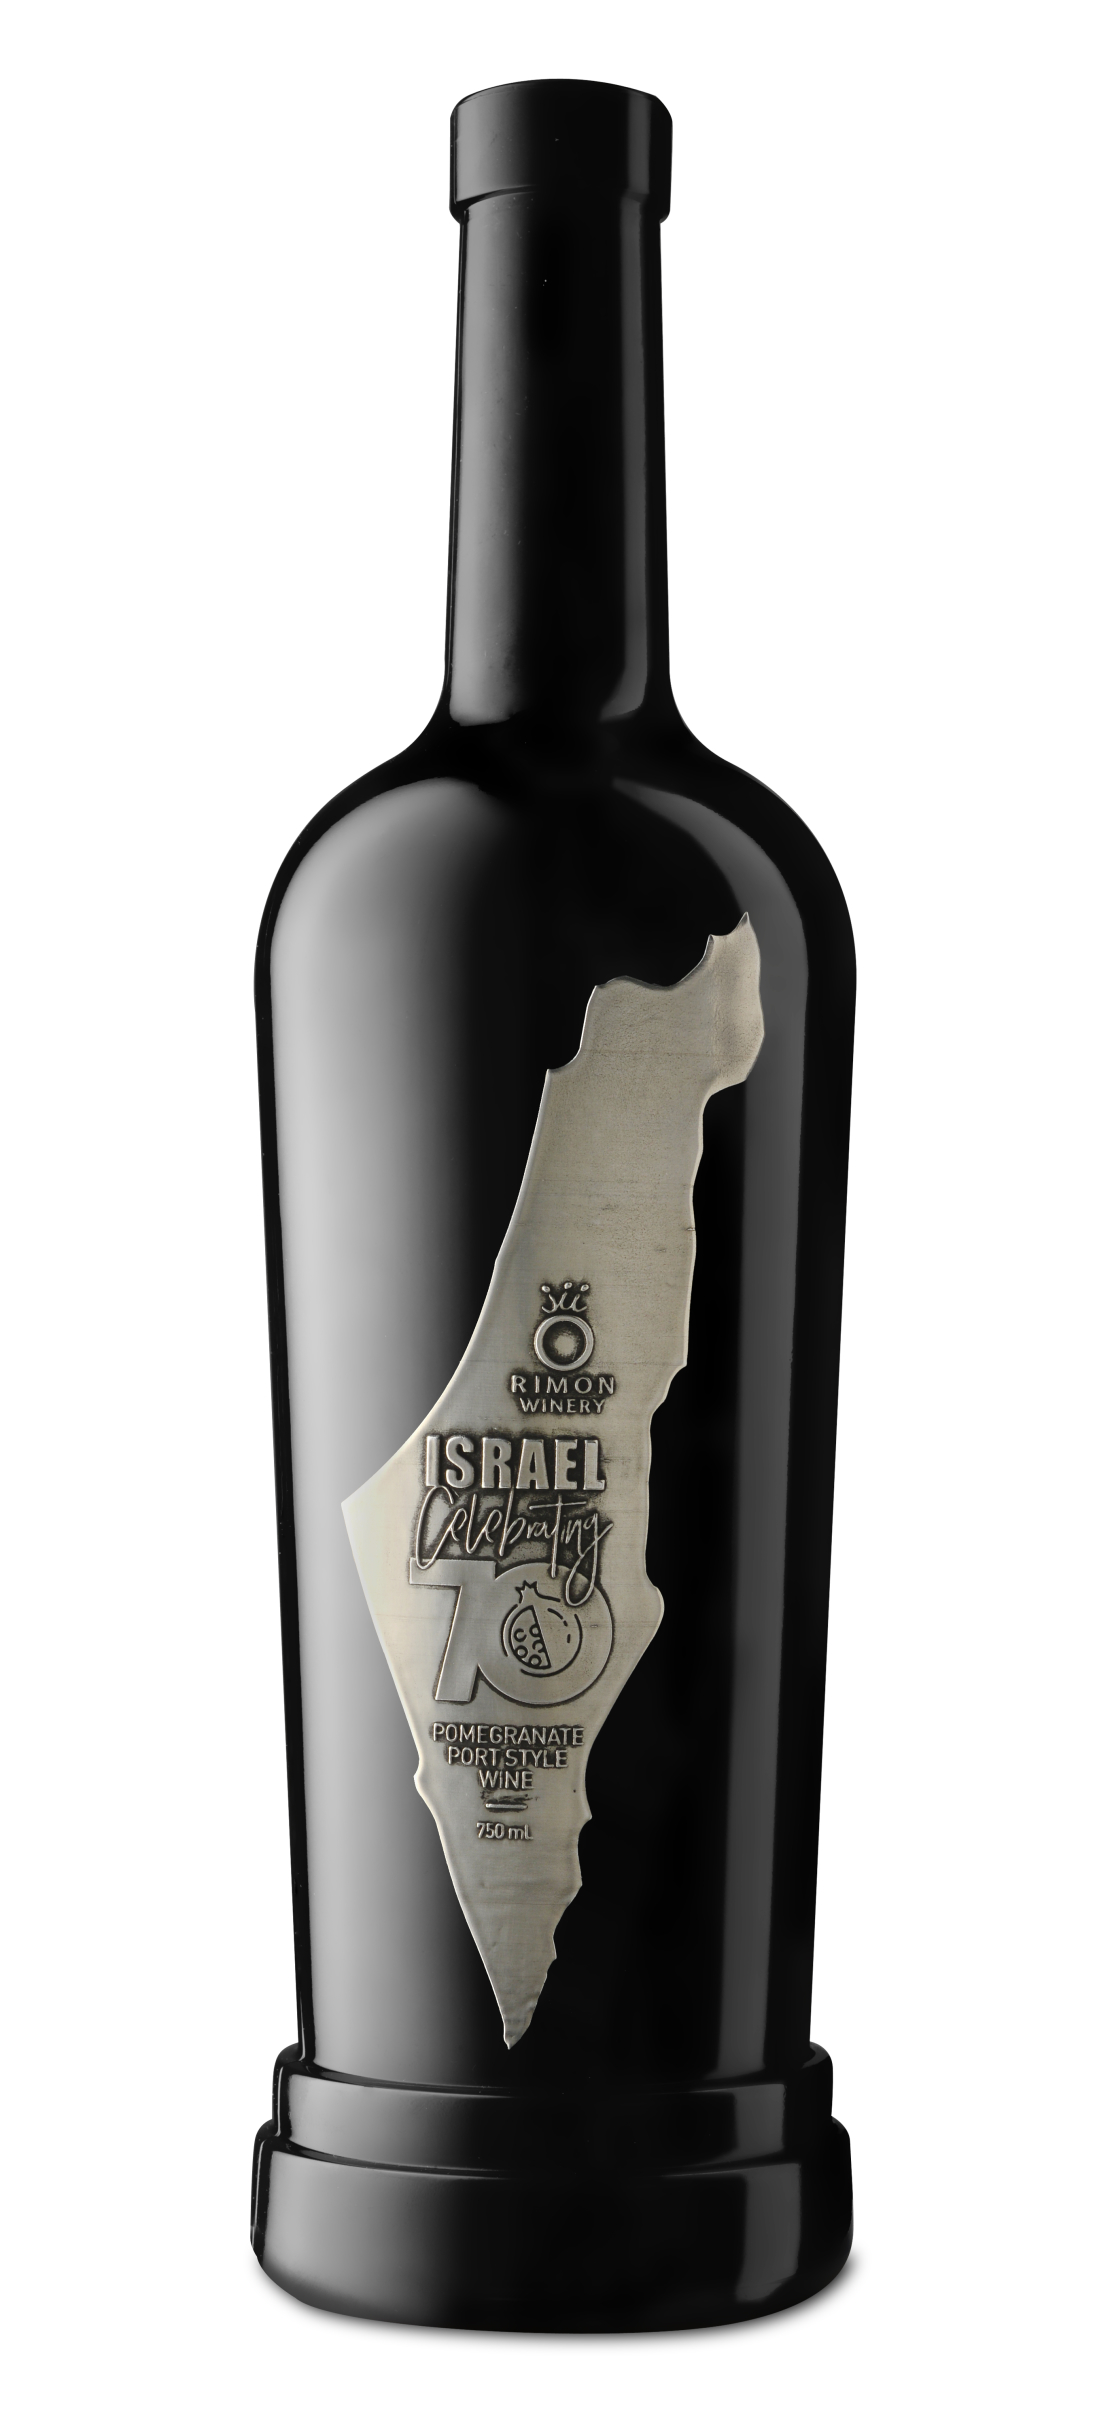 Limited edition in honor of the 70th anniversary of Israel | RIMON WINERY